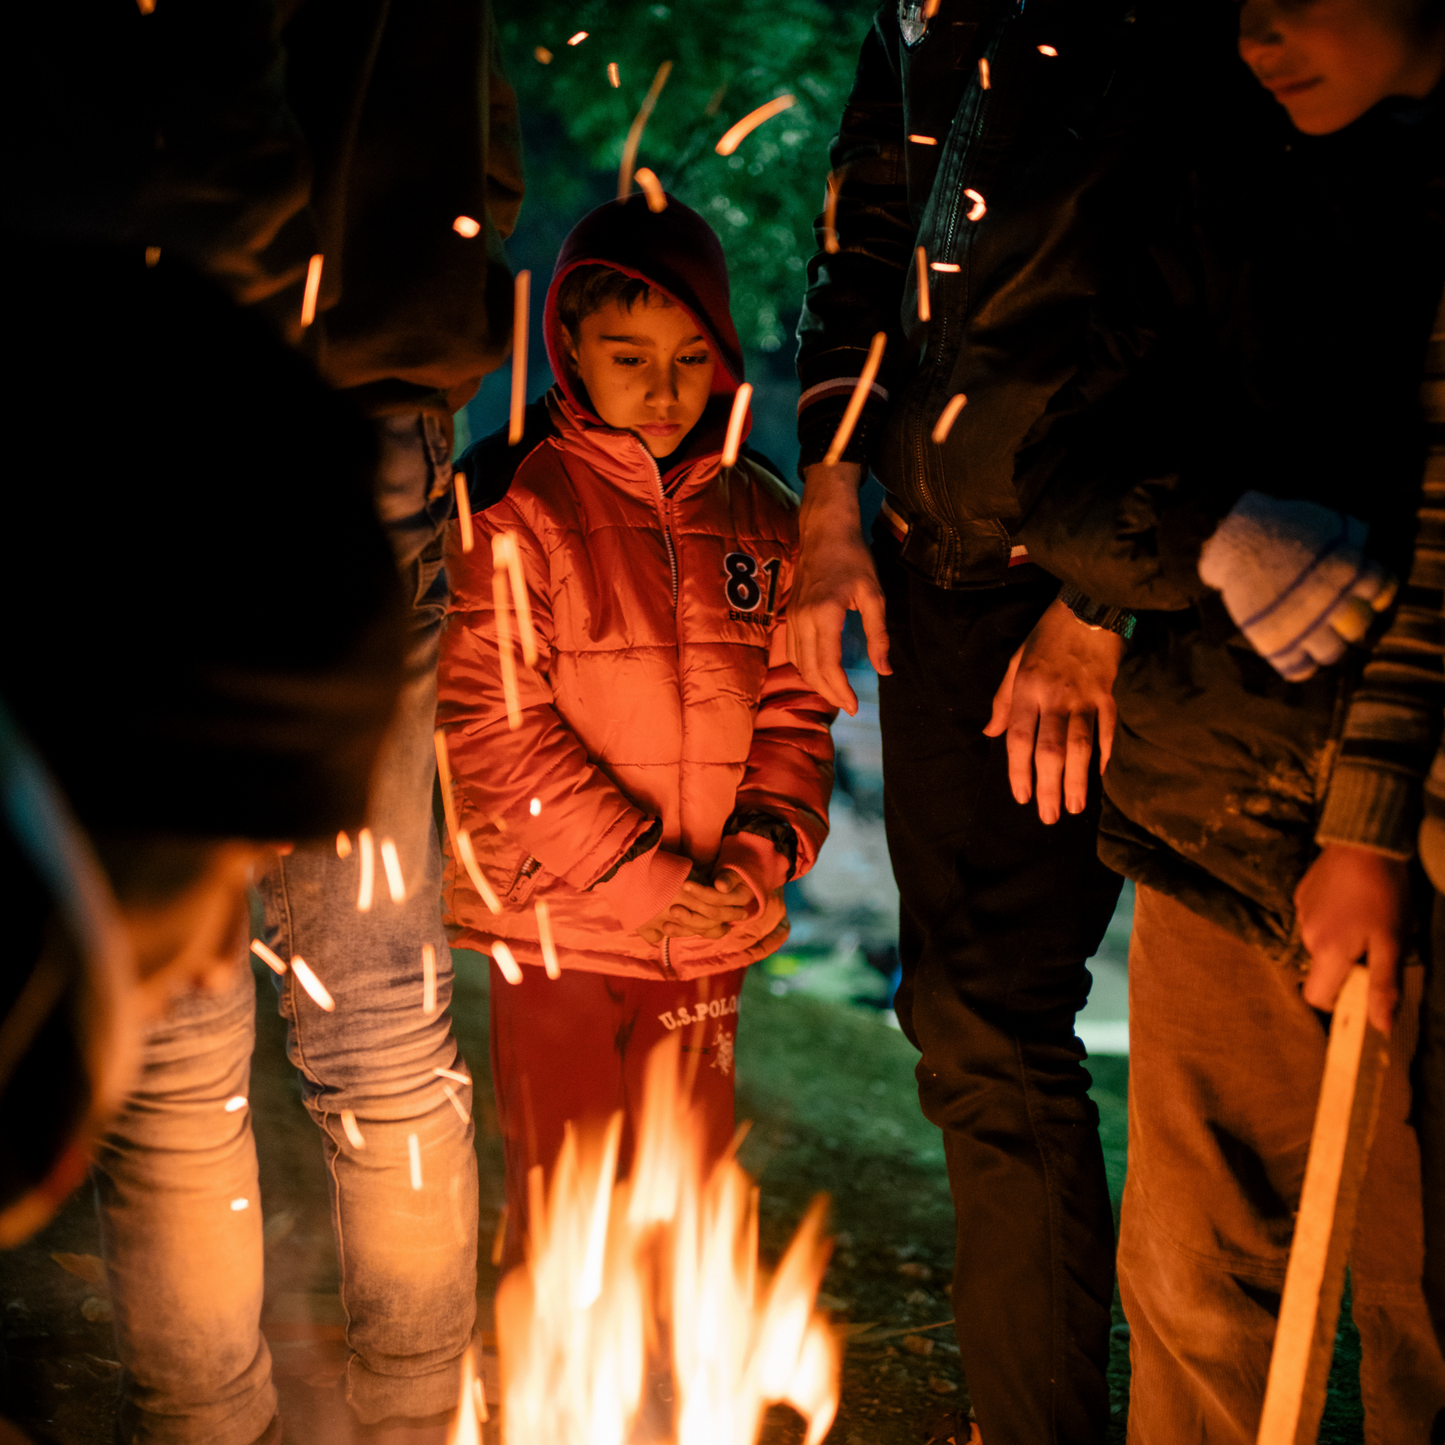 The image is showing a couple of refugees around a fire at night trying to warm up. The focus is on a young boy who is wearing a thick winter coat and is looking down at the fire.